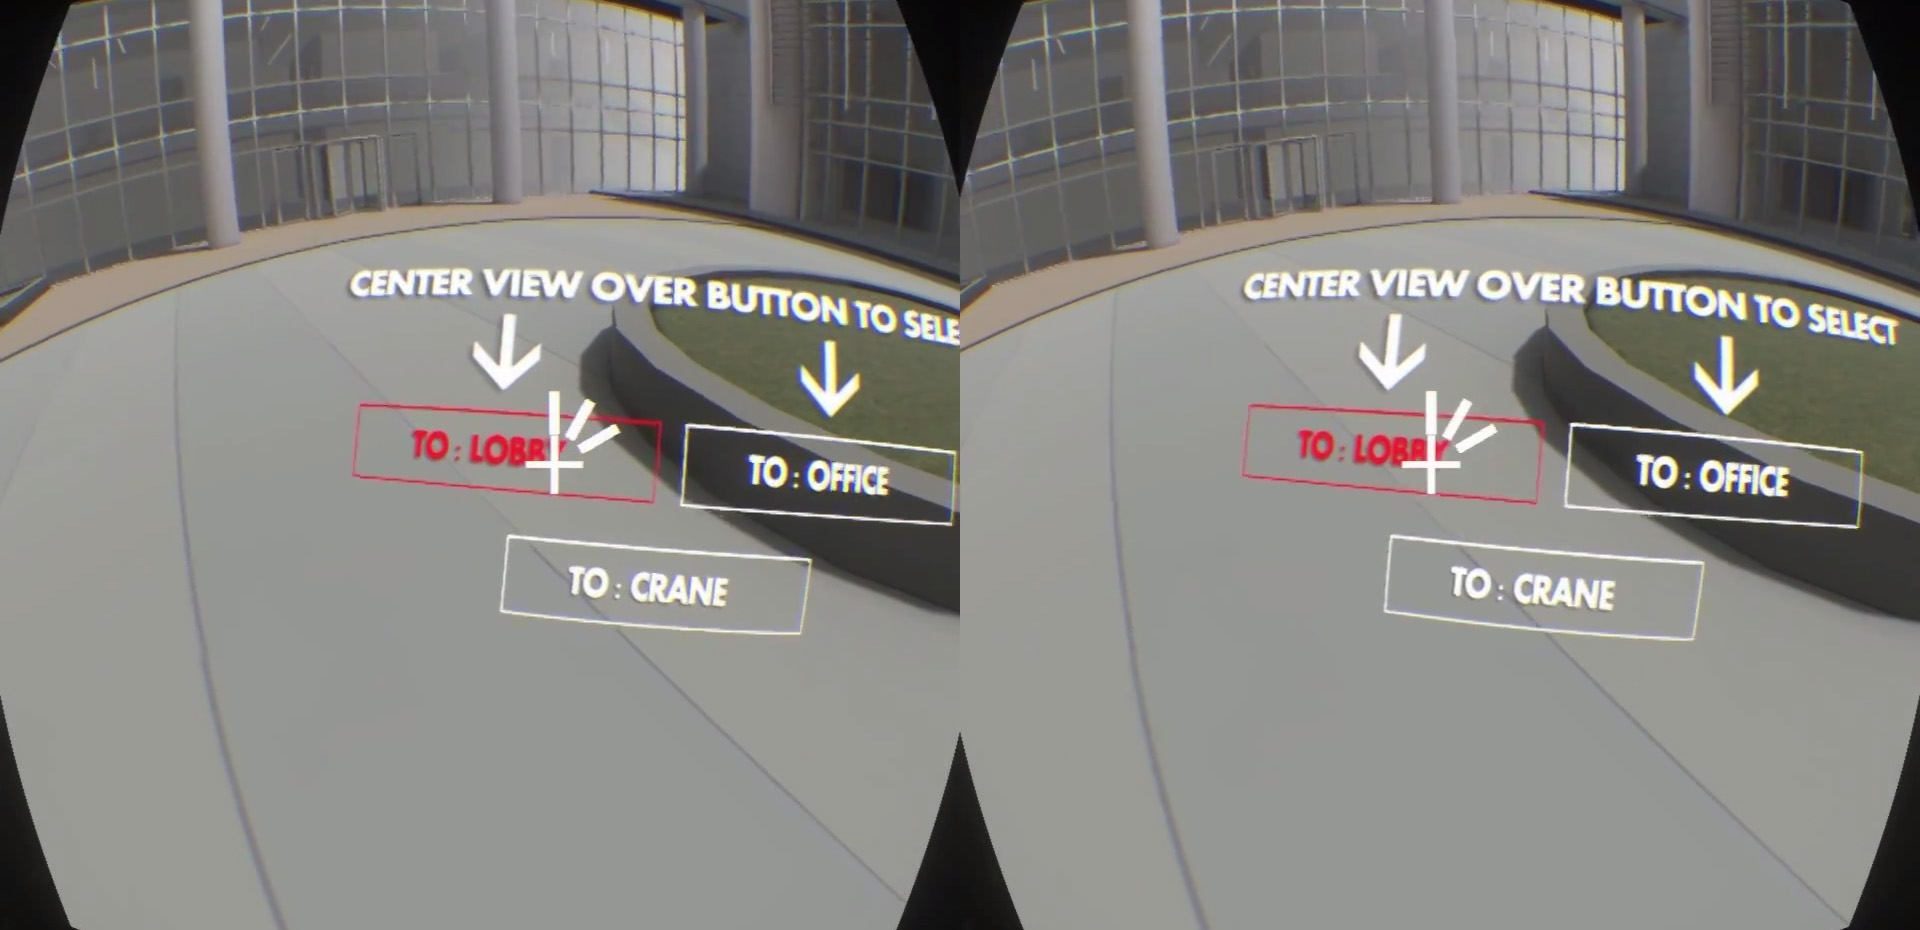 UI Interface for Navigation with Oculus Rift VR in architectural visualization